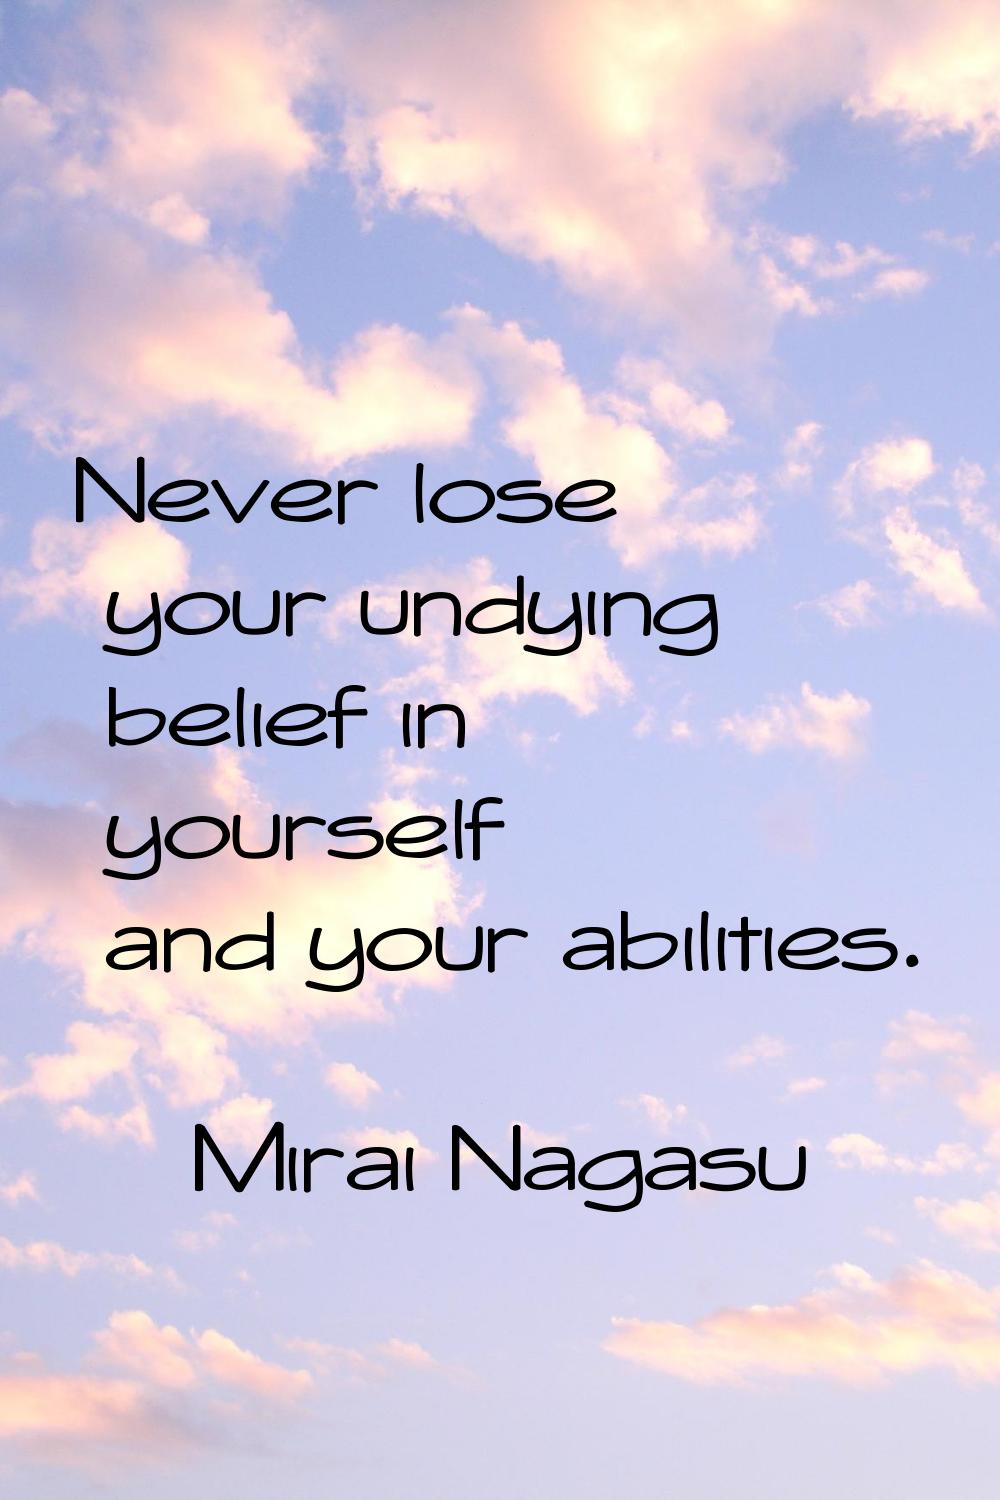 Never lose your undying belief in yourself and your abilities.